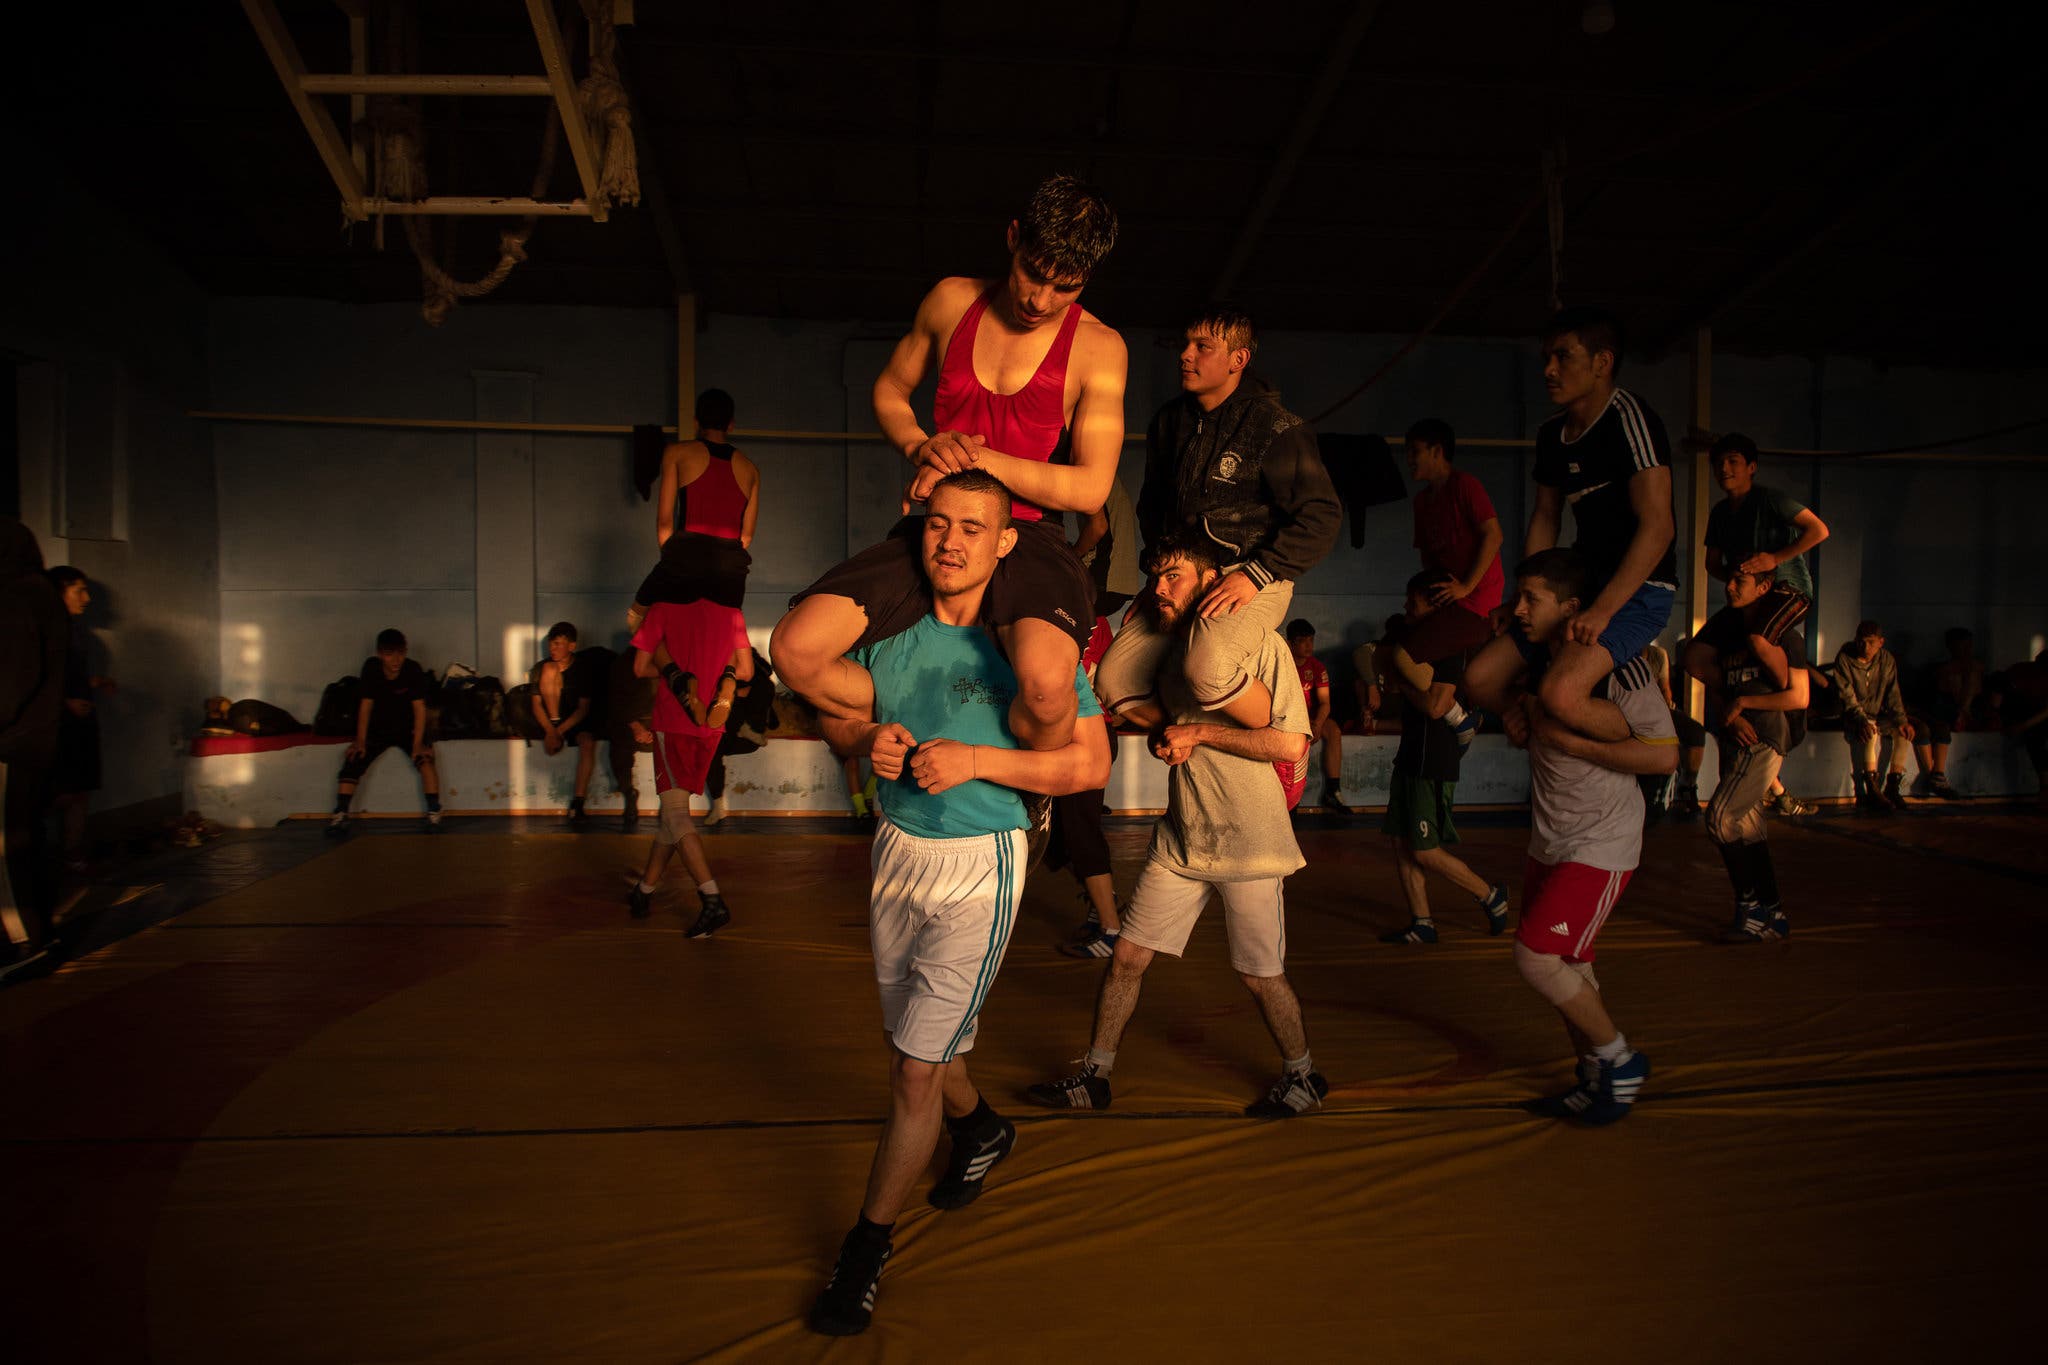 Read more about the article Bombed by ISIS, an Afghan Wrestling Club Is Back: ‘They Can’t Stop Us’